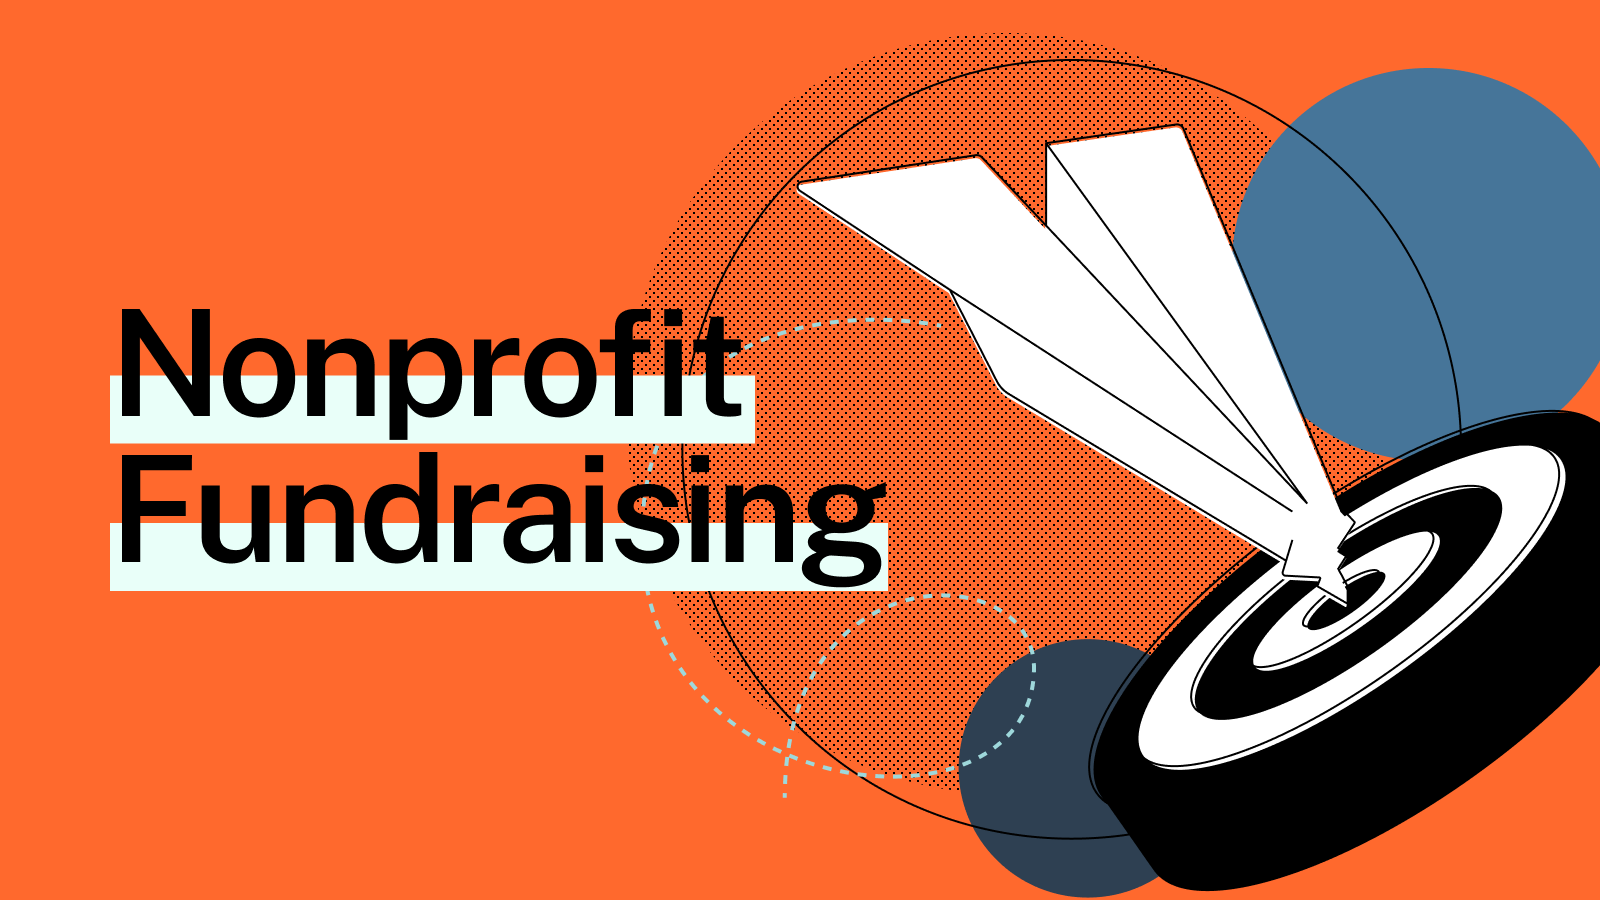 Fundraise Up: The #1 Online Giving Platform for Nonprofits on HubSpot